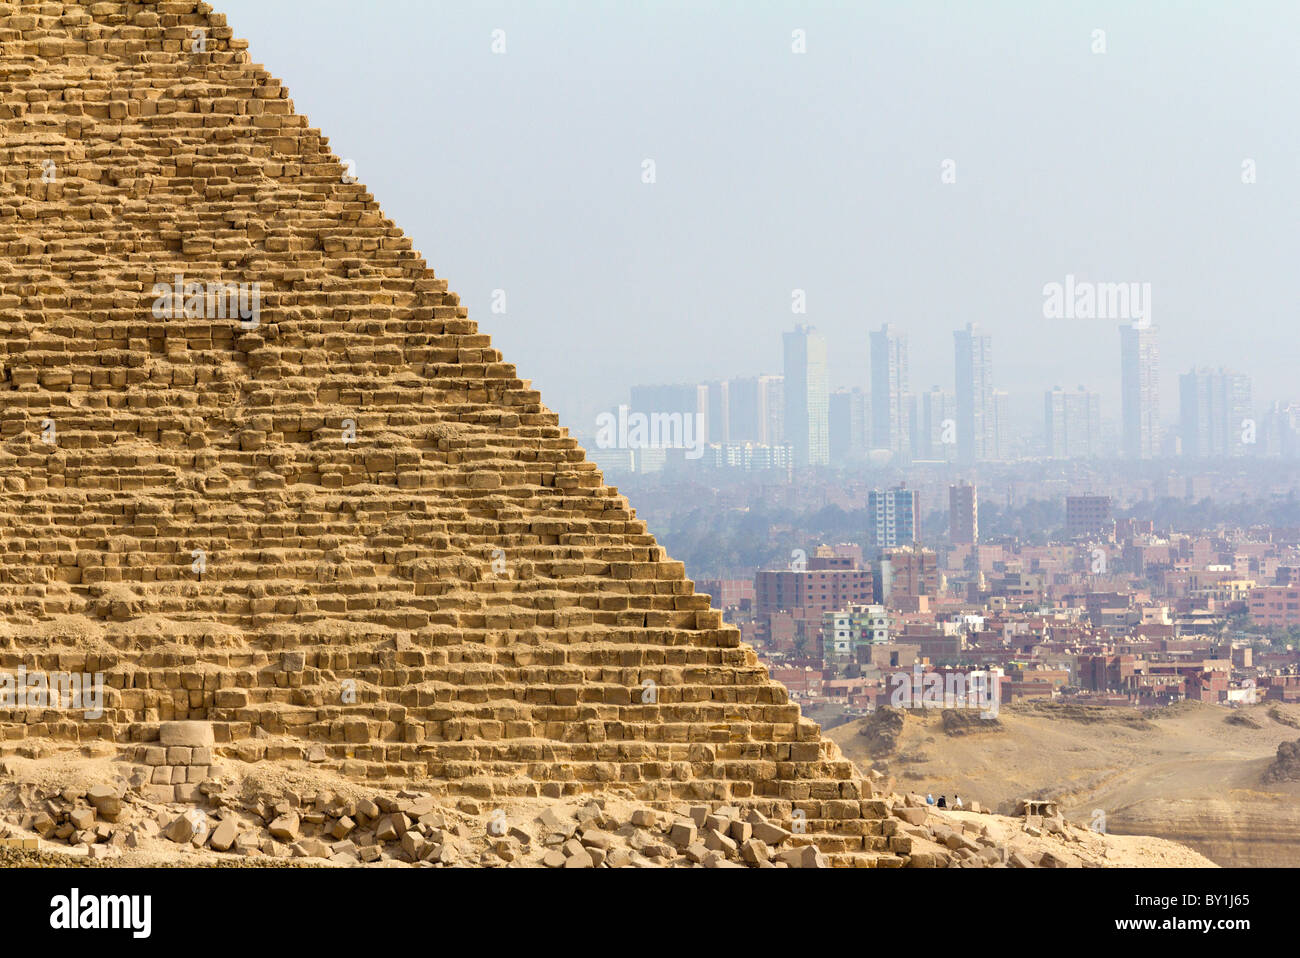 Pyramids at Giza, Egypt- Menkaure and skyscrapers of Cairo in hazy background Stock Photo